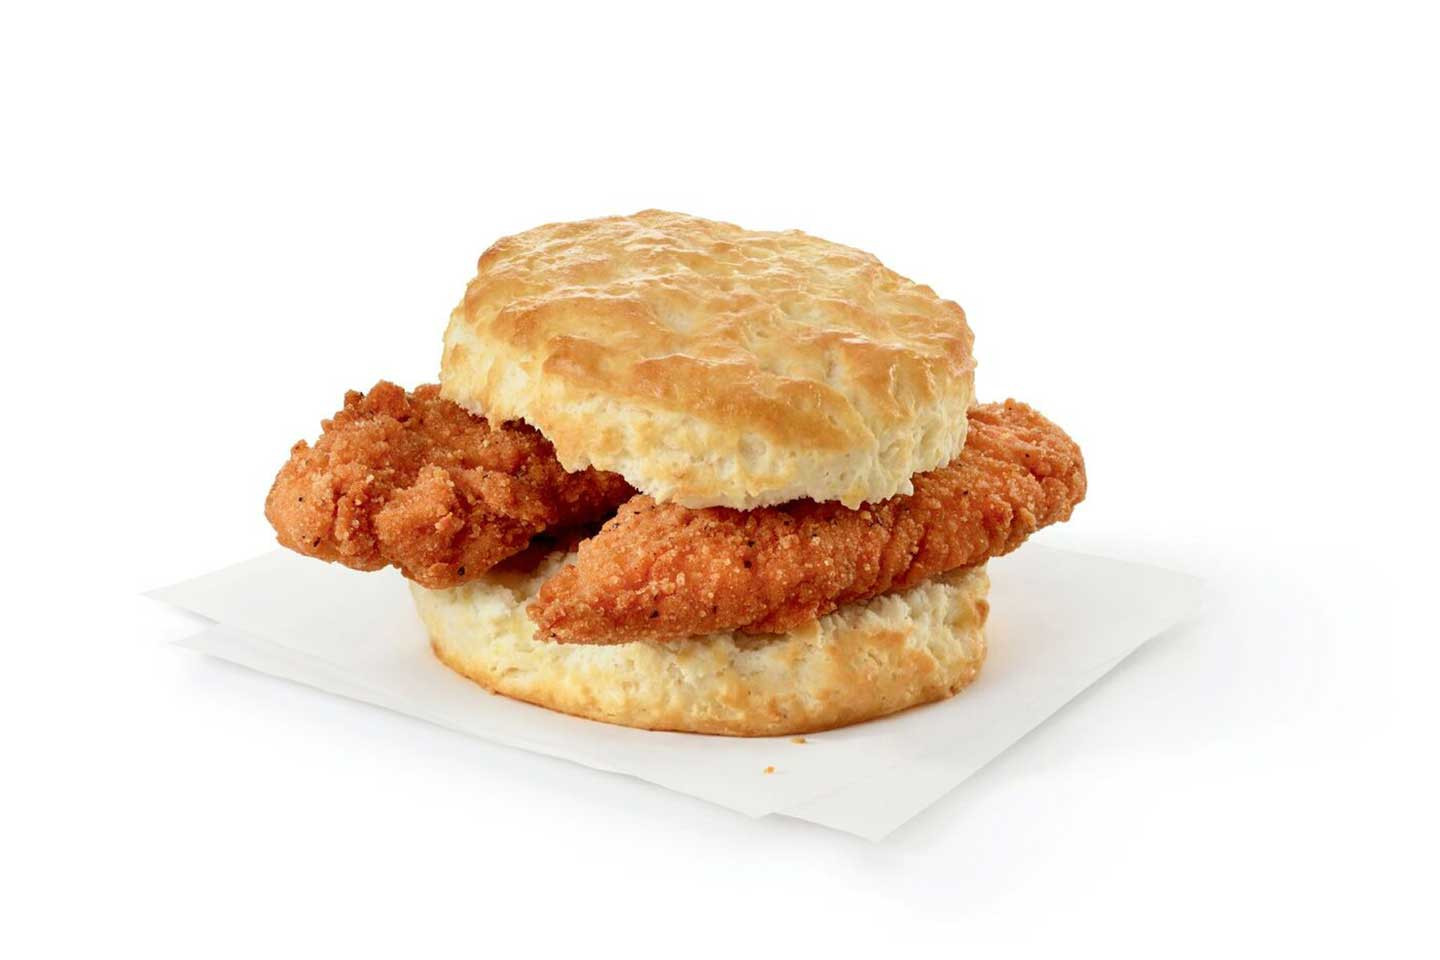 chicken in a biscuit in england